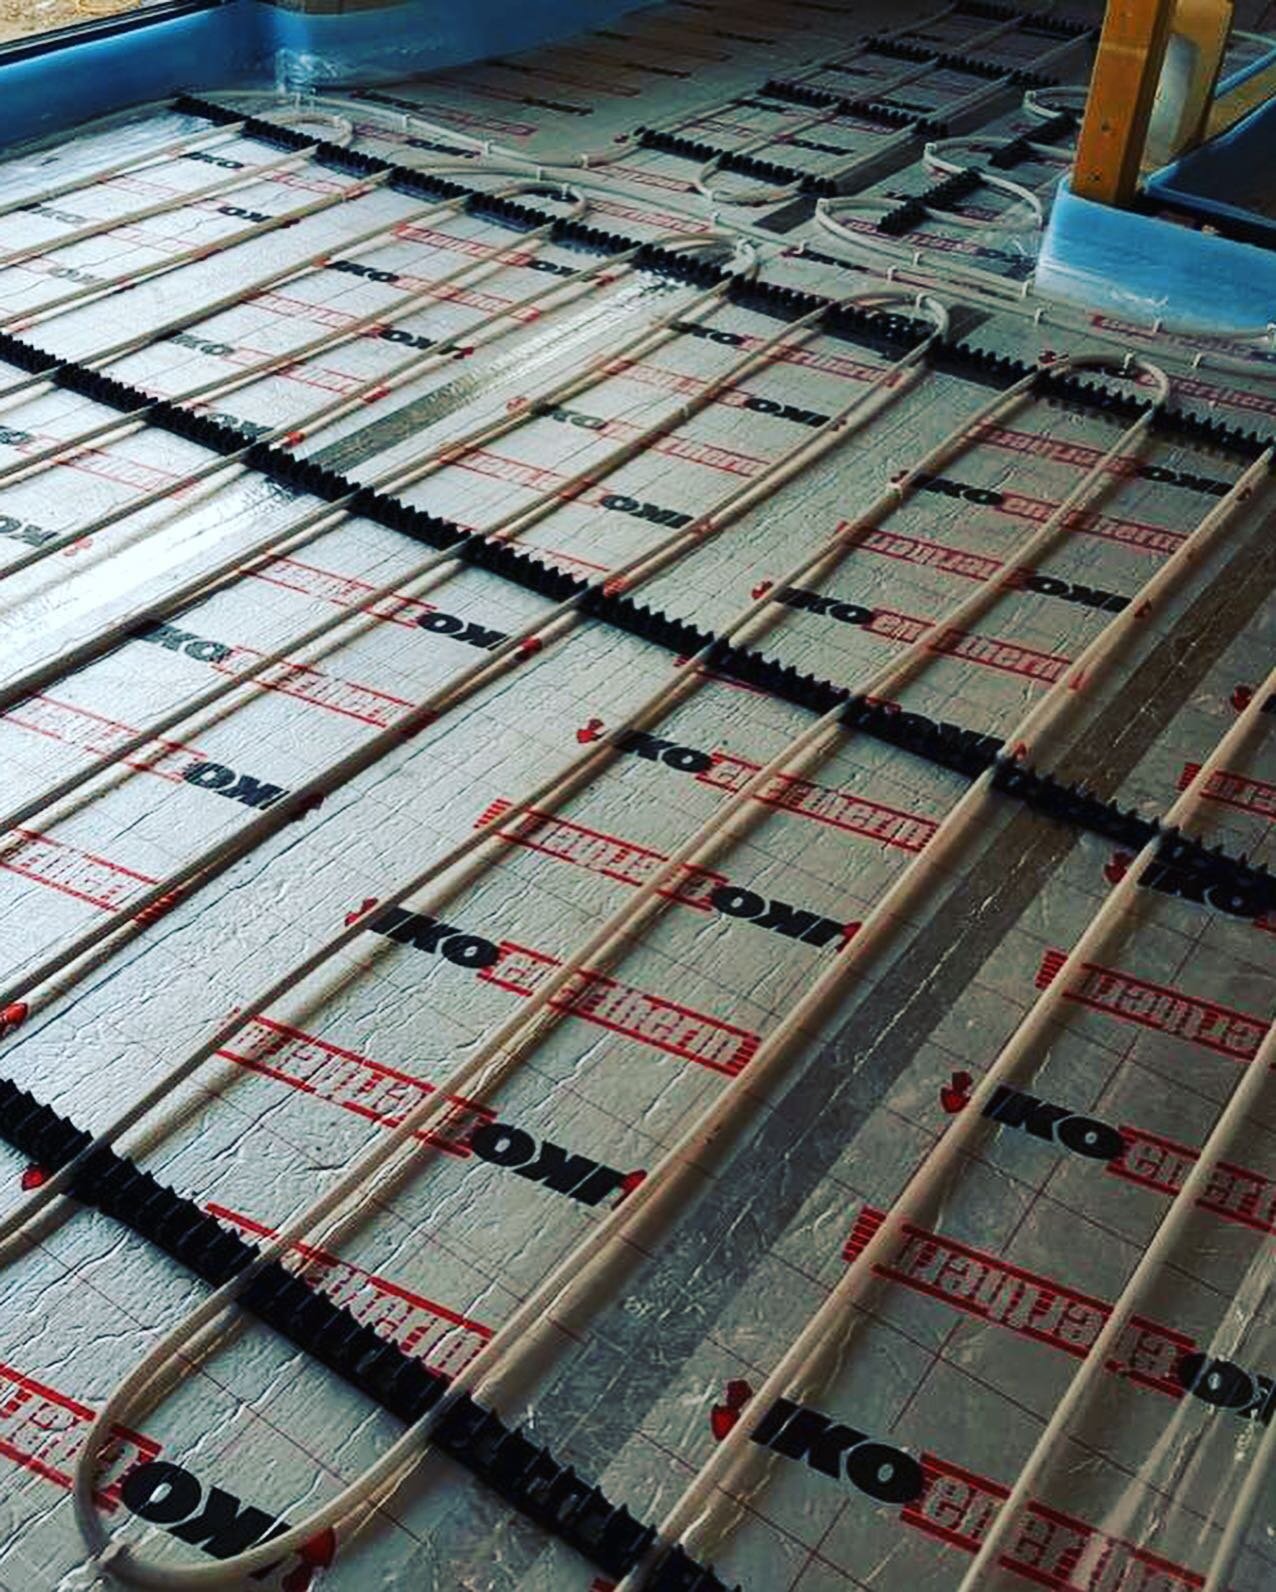 Are you considering underfloor heating?

Many benefits are:

Energy-efficiency - no cold spots
Low maintenance of heating 
Freedom of design 
Safety and easy of installation 

Get in touch and get your quote today!

#underfloorheating #underfloorheat